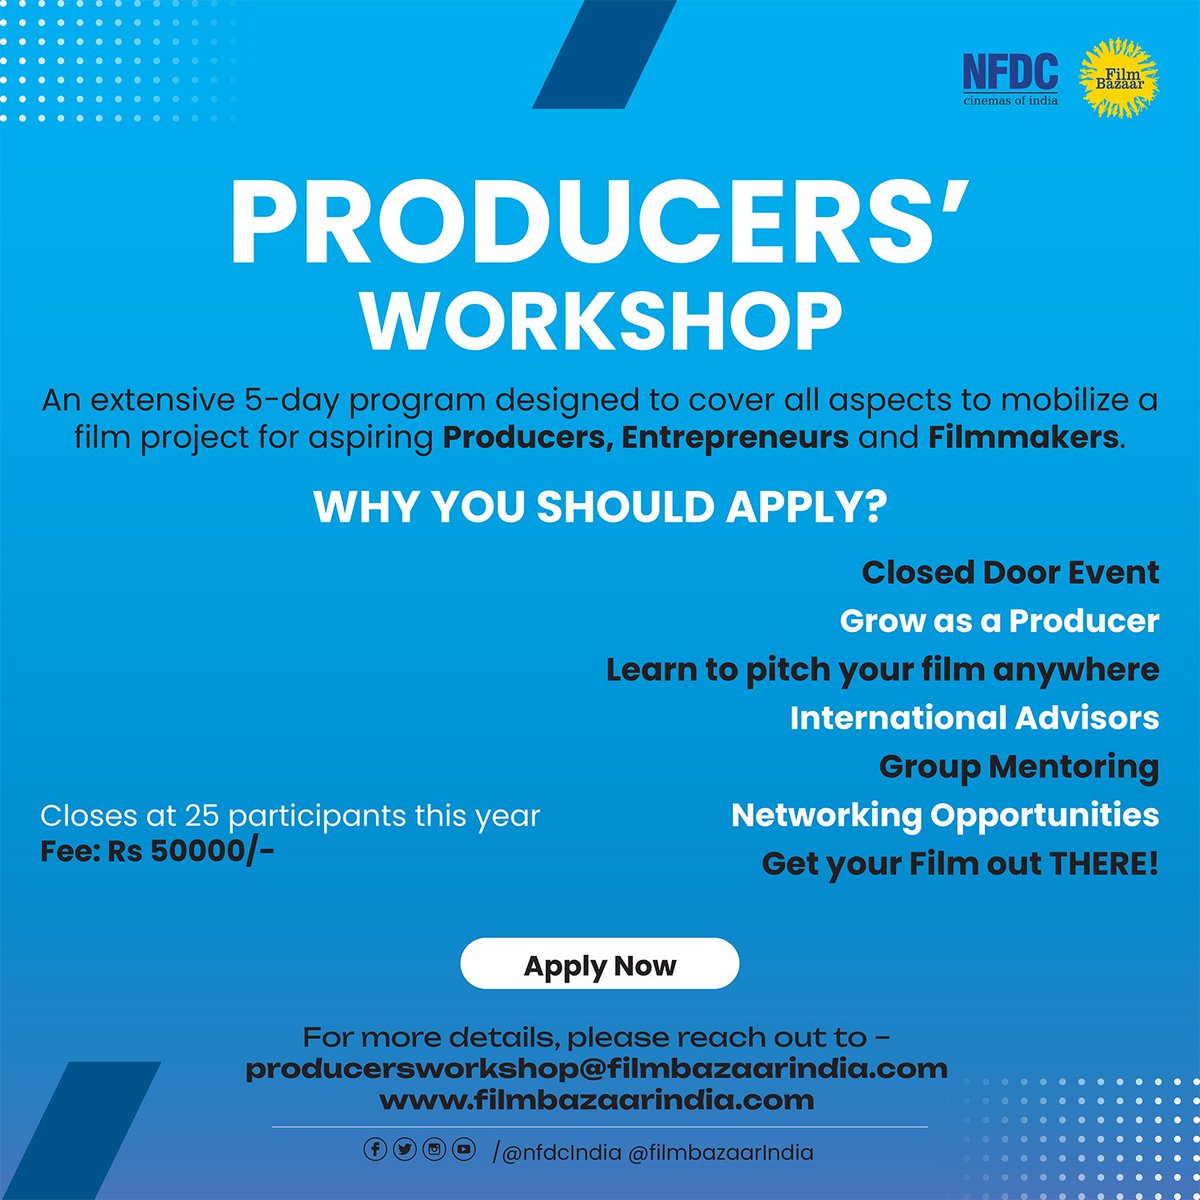 We invite producers, entrepreneurs, and filmmakers to sharpen their pitching, financing, sales, and distribution skills for their upcoming film projects. An unparalleled opportunity to network and collaborate with leaders in the global film industry.